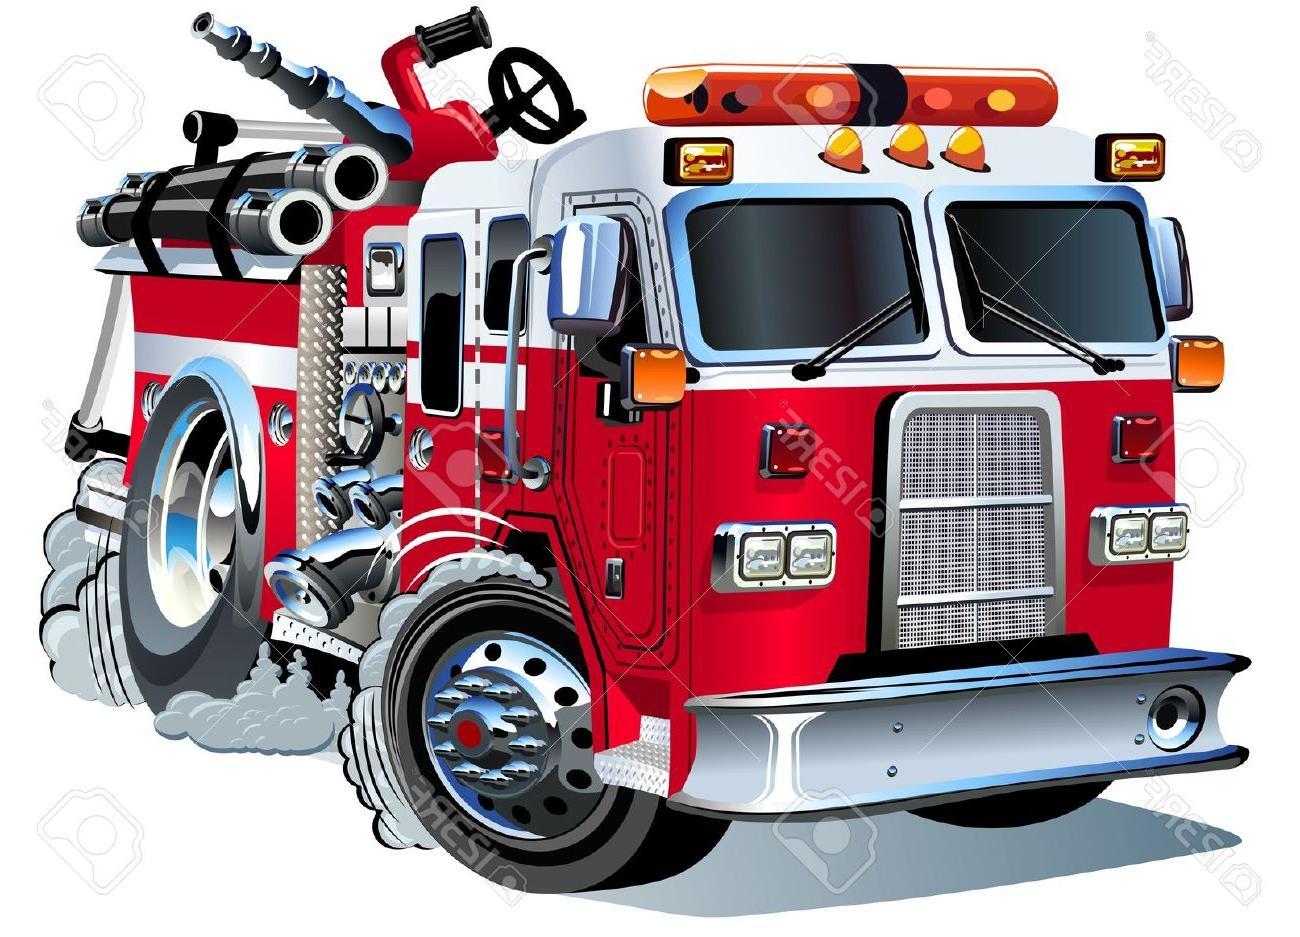 Firetruck Image Free download on ClipArtMag